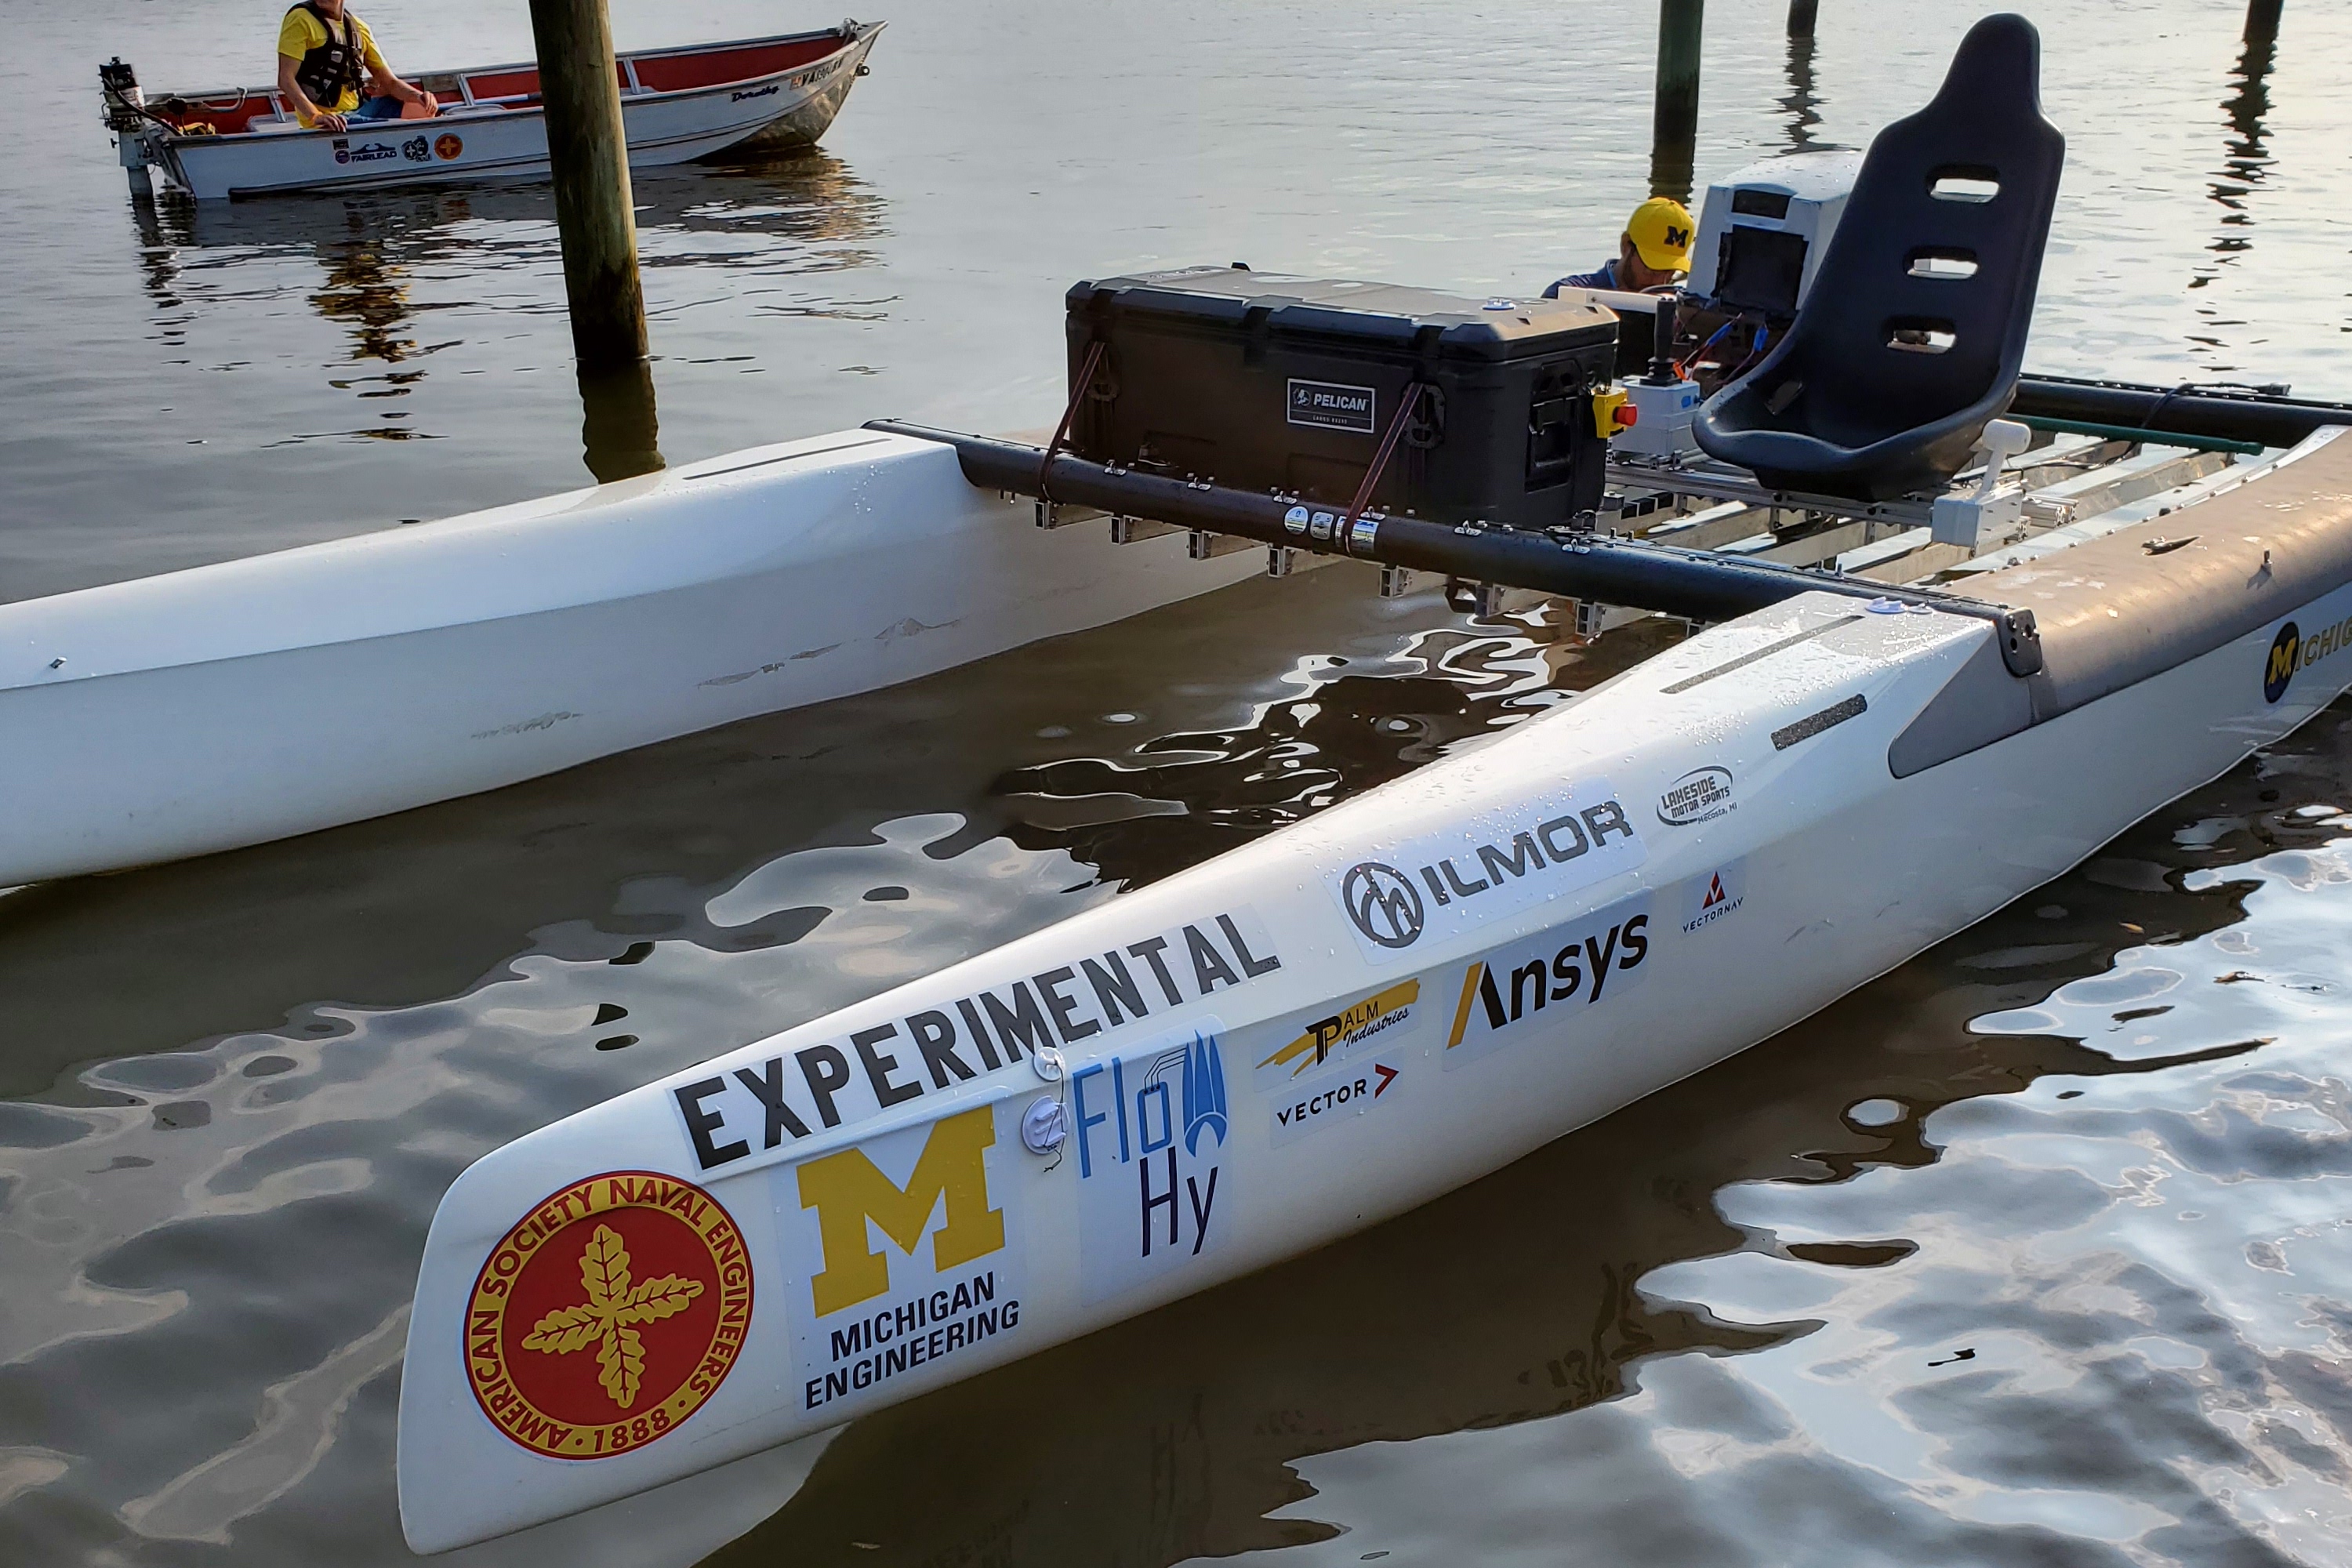 UMEB team fine tuning their boat before the race